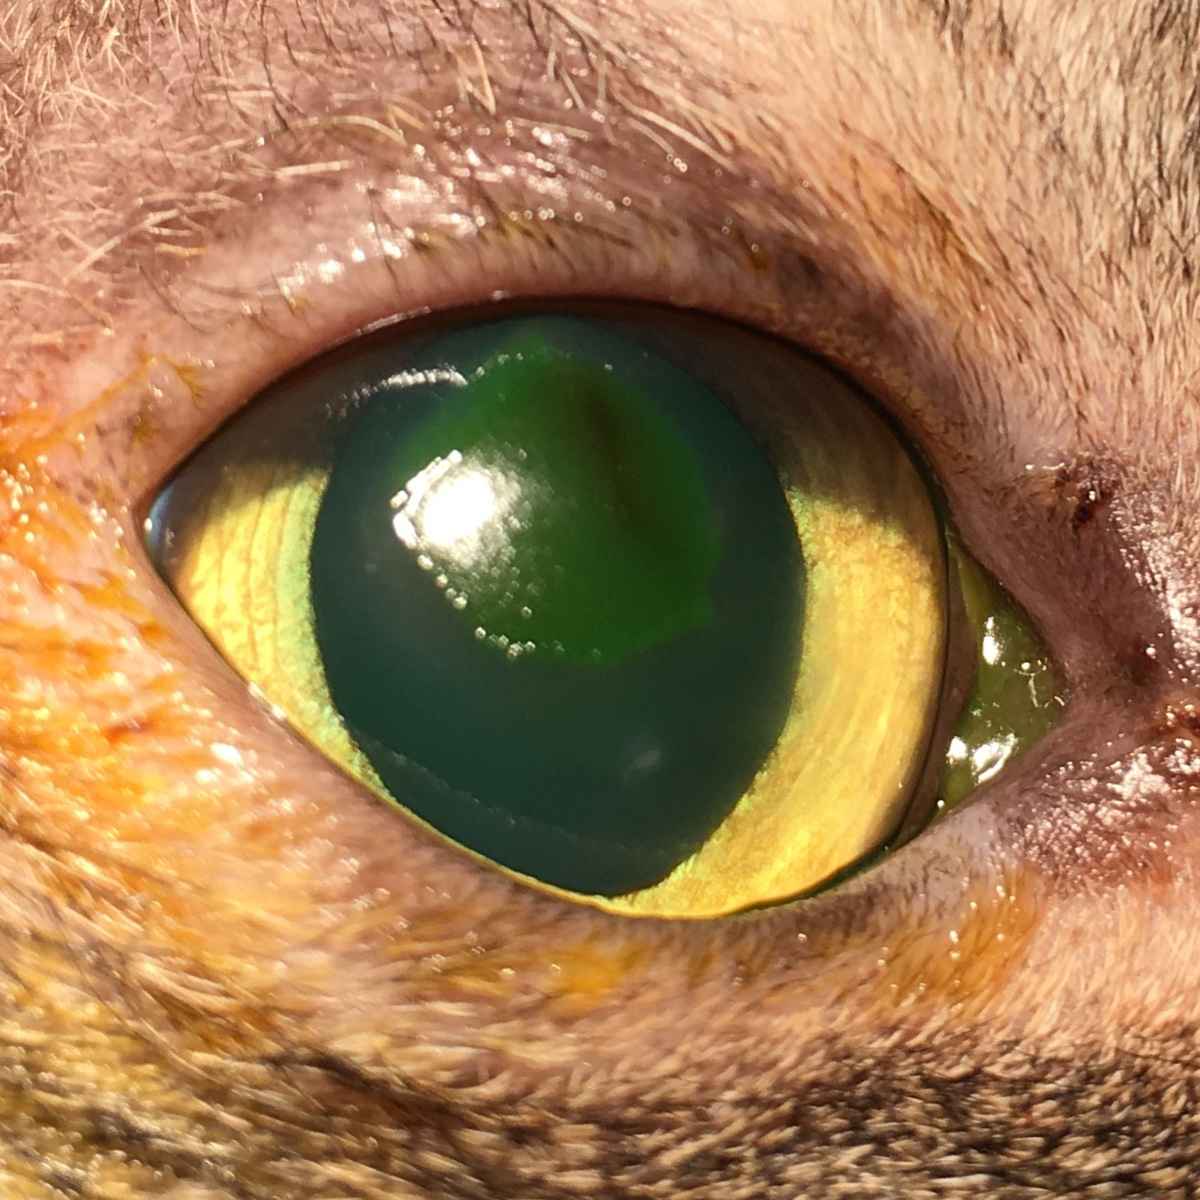 What Dog or Cat Eye Problem Is That? Walkerville Vet